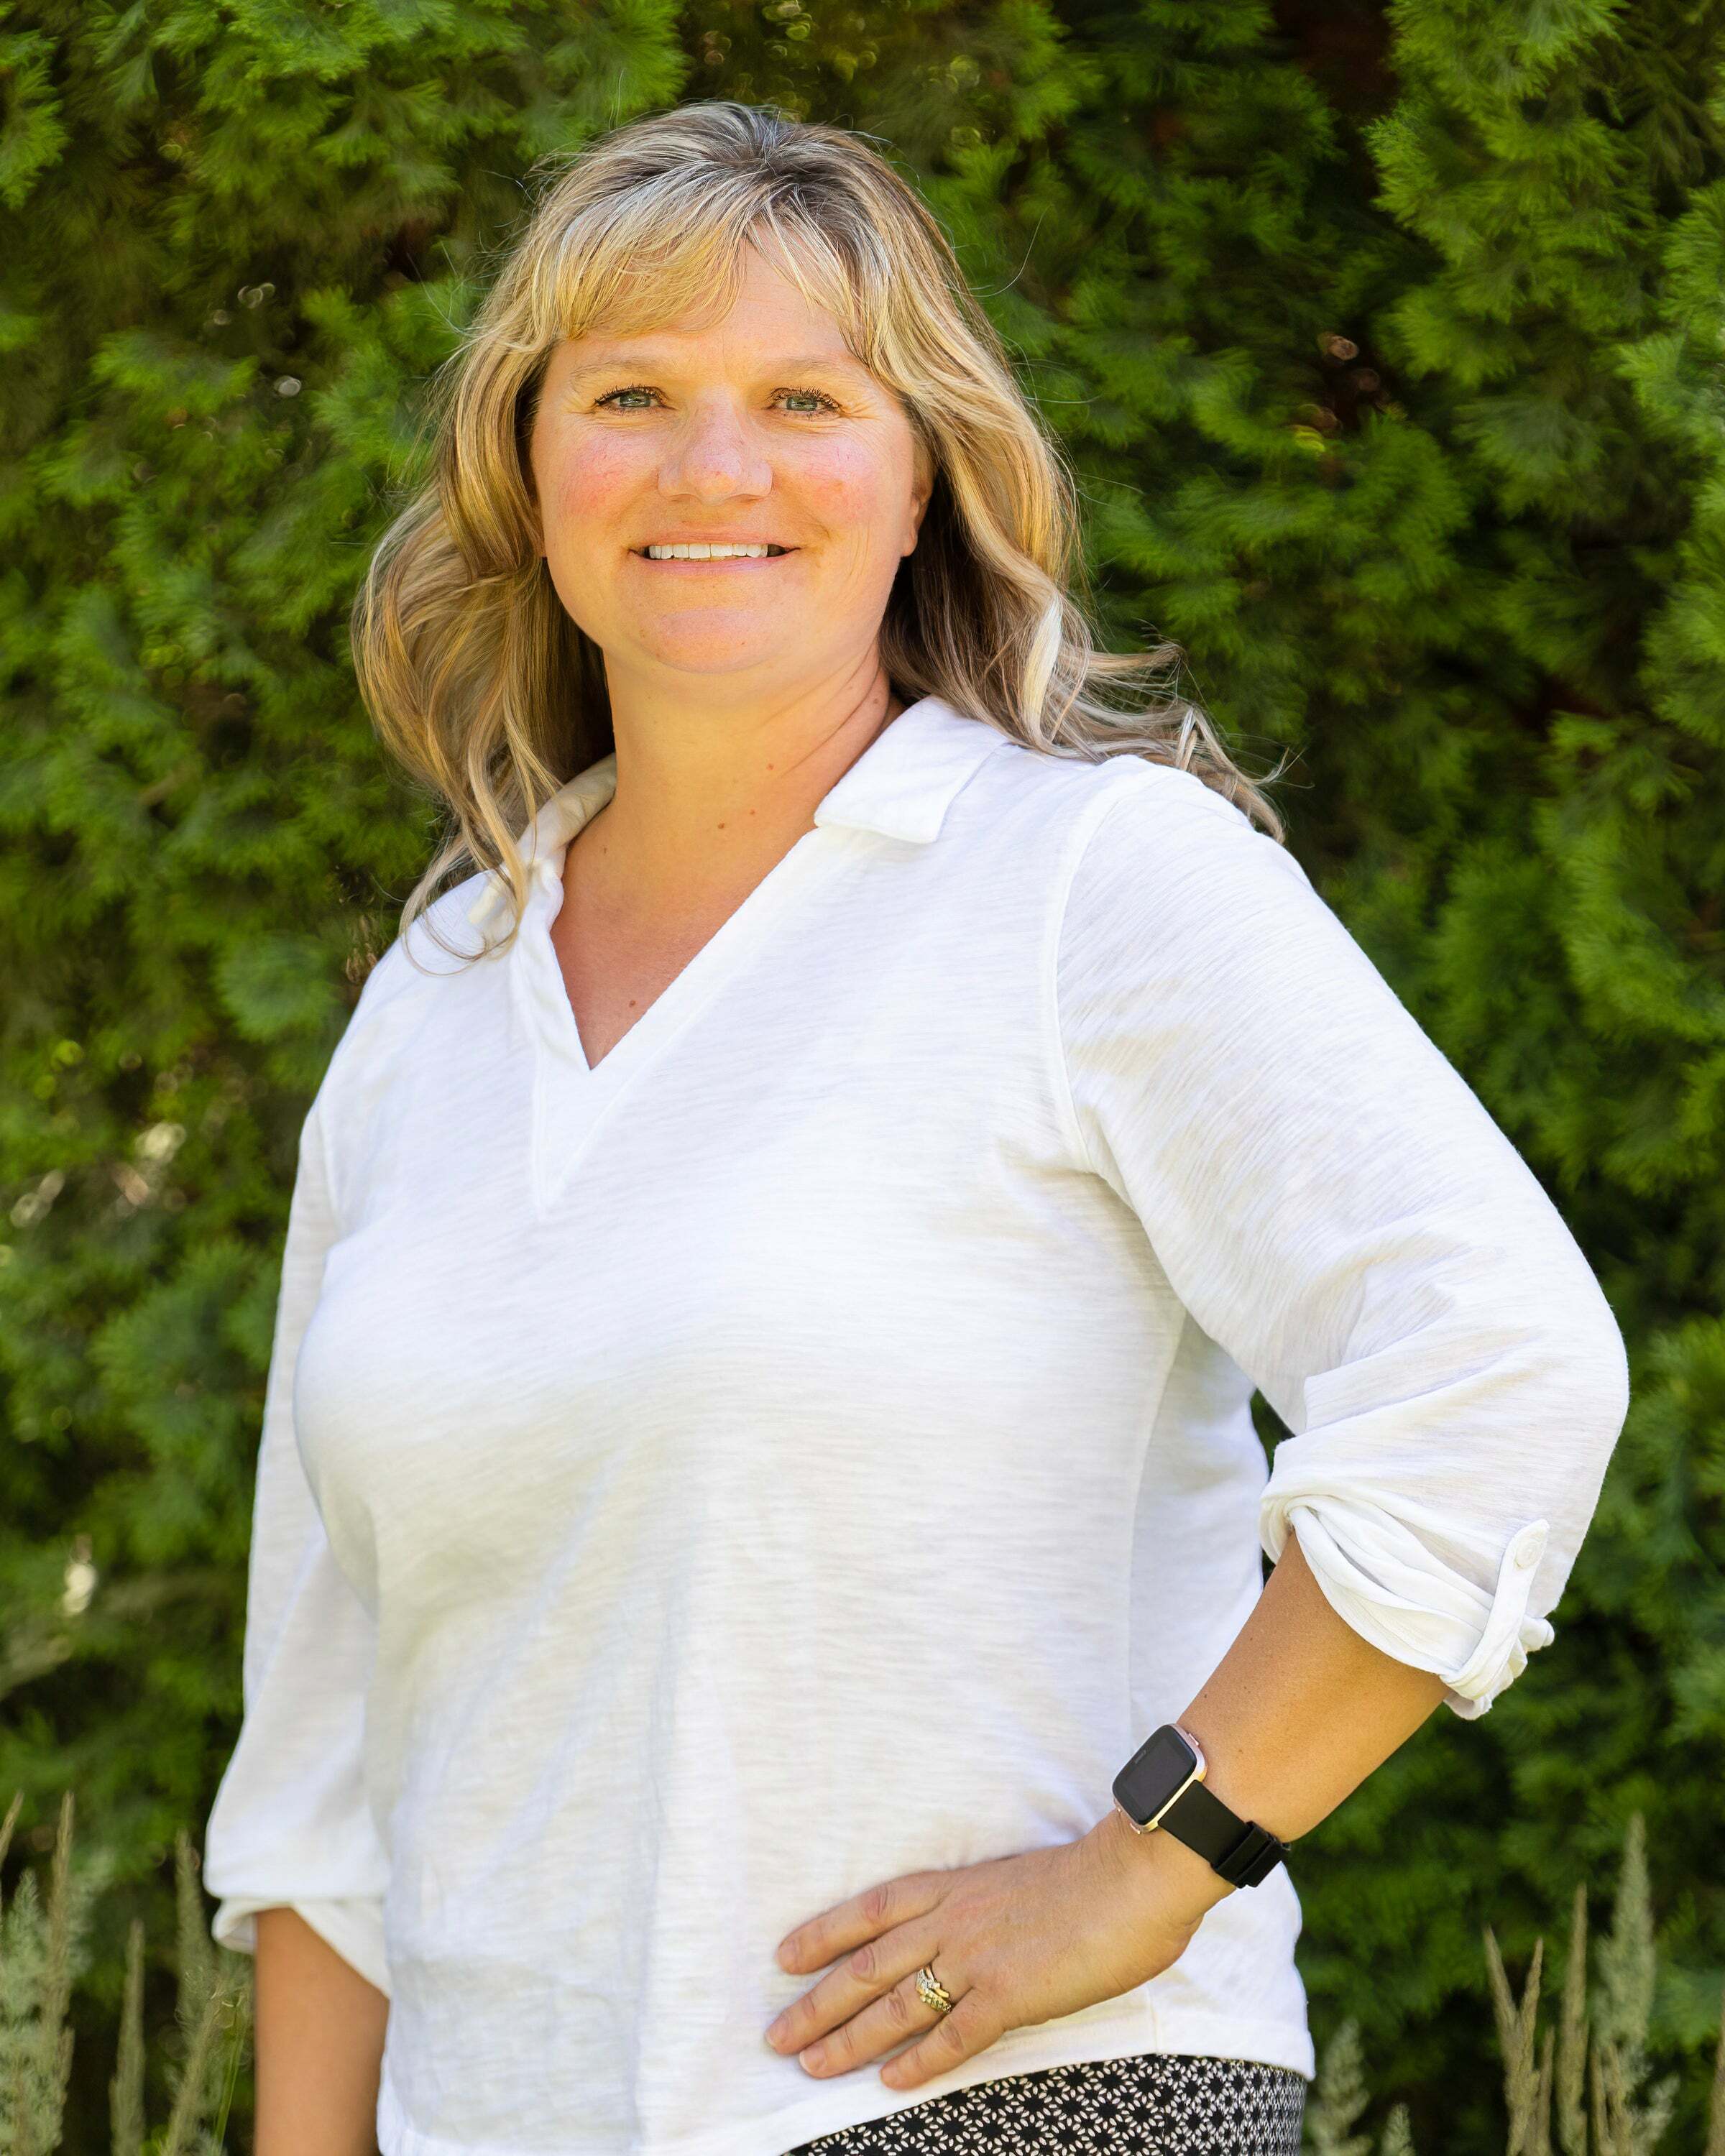 Athlyn Kellogg, Real Estate Salesperson in Nampa, Home 2 Home